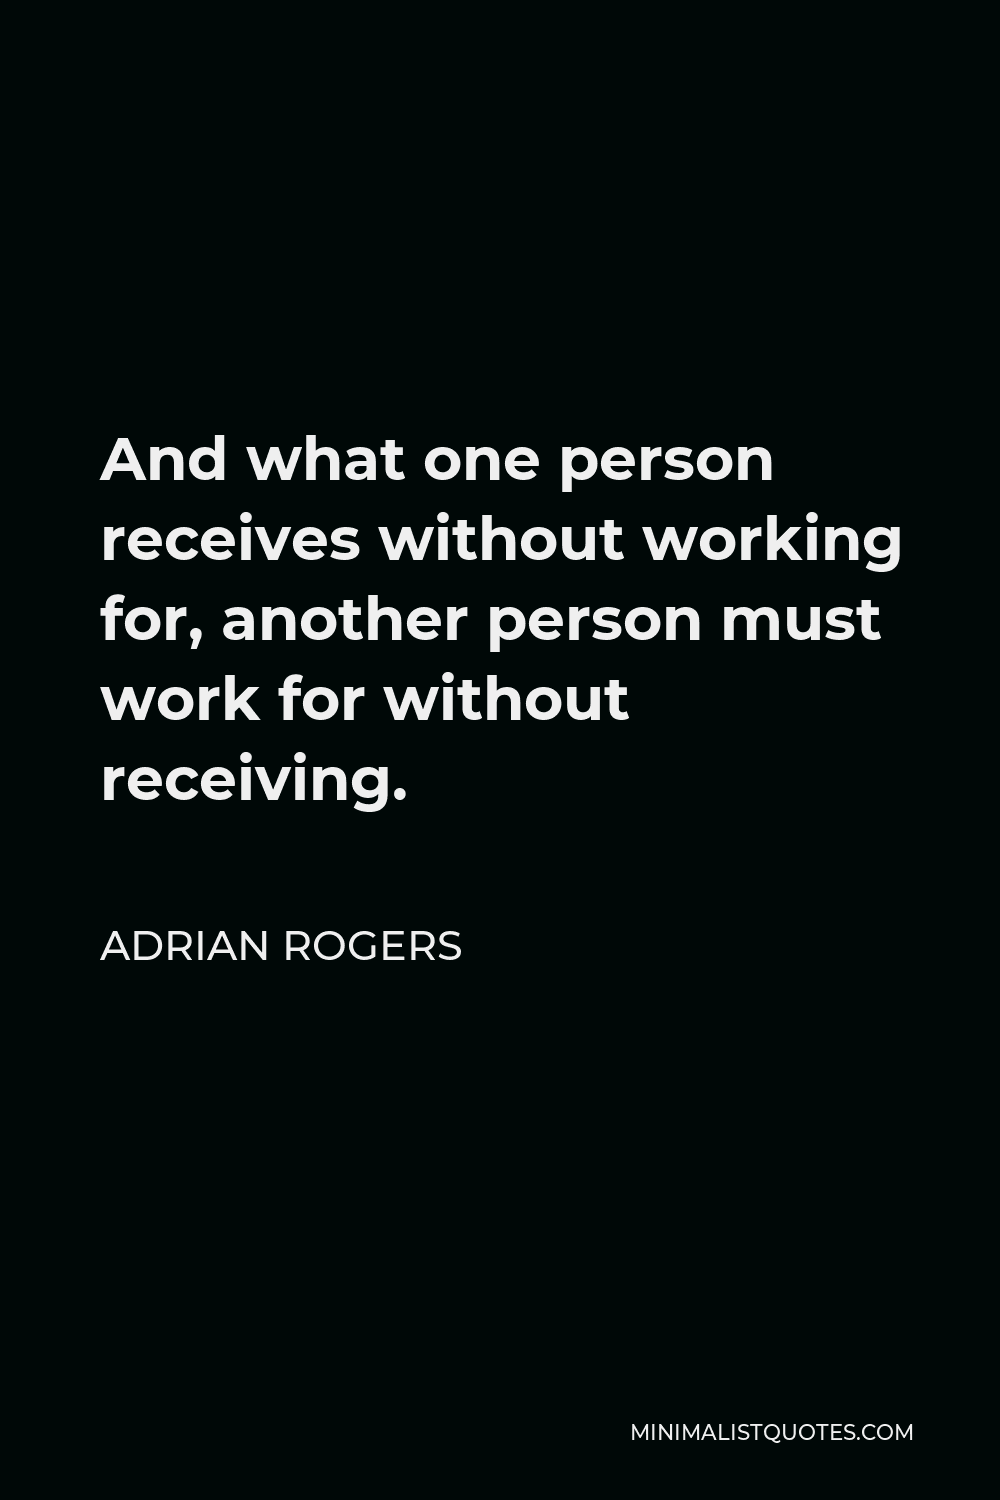 Adrian Rogers Quote - And what one person receives without working for, another person must work for without receiving.